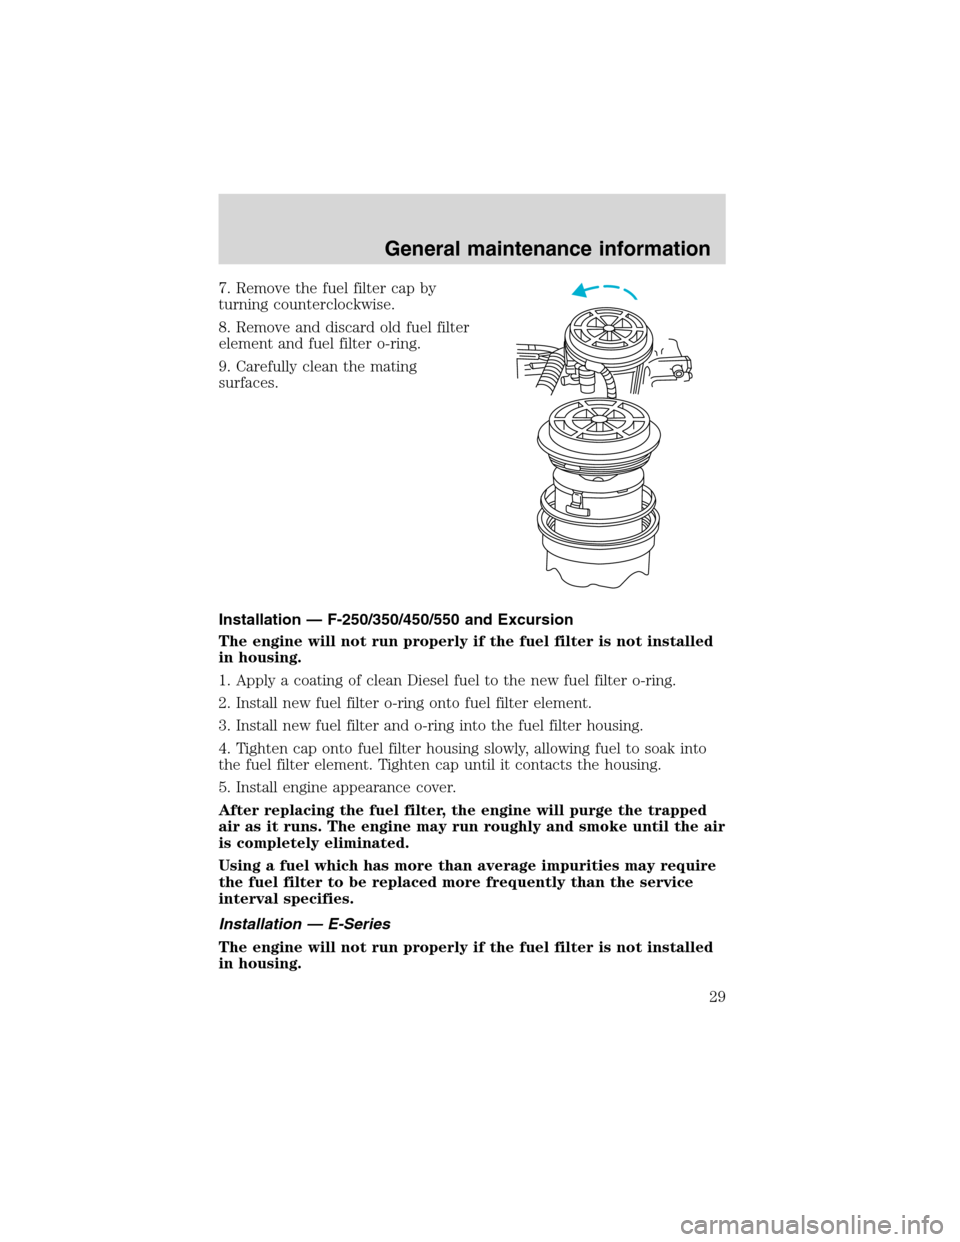 FORD E SERIES 2004 4.G 7.3L Diesel Supplement Manual 7. Remove the fuel filter cap by
turning counterclockwise.
8. Remove and discard old fuel filter
element and fuel filter o-ring.
9. Carefully clean the mating
surfaces.
Installation—F-250/350/450/55